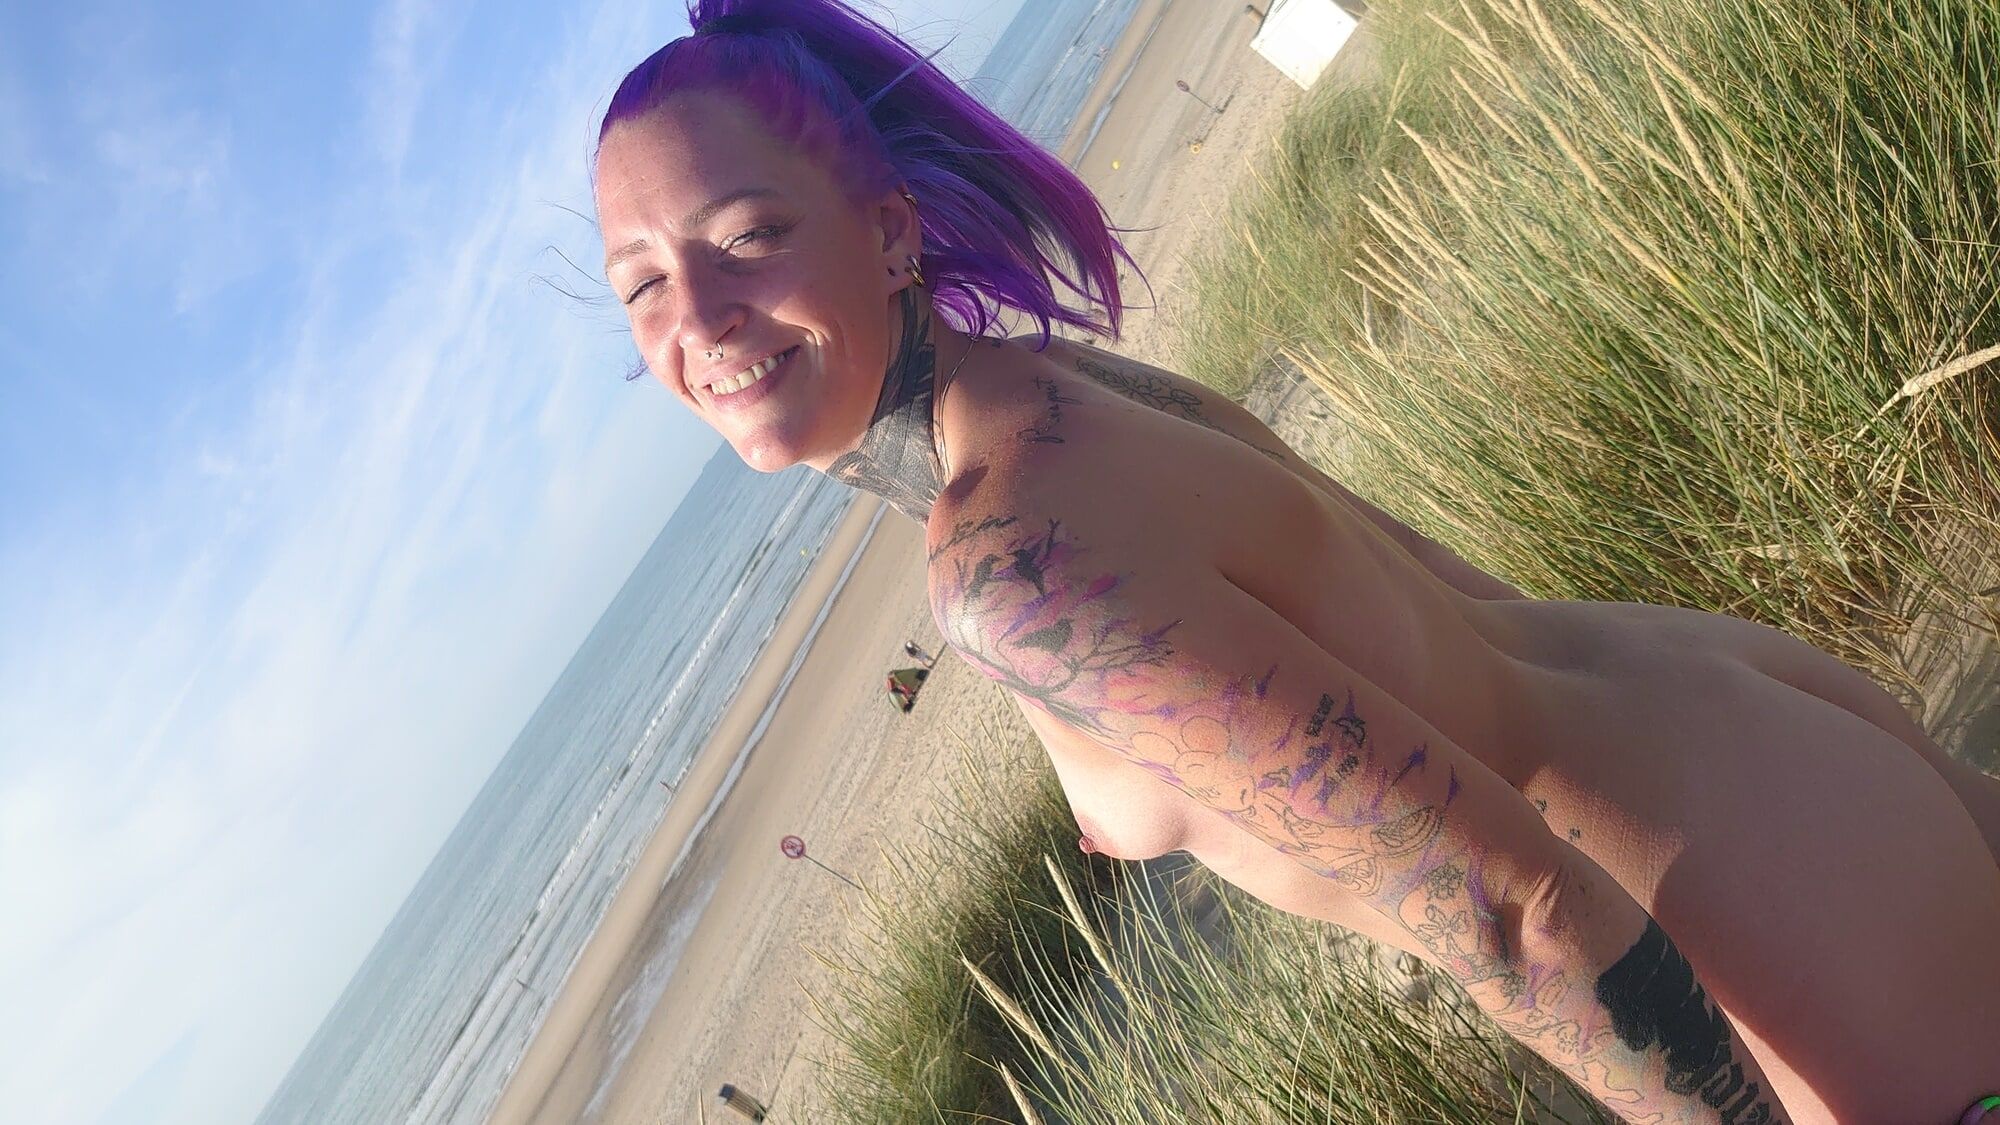 Cute Rave Girl with Tattoos #2